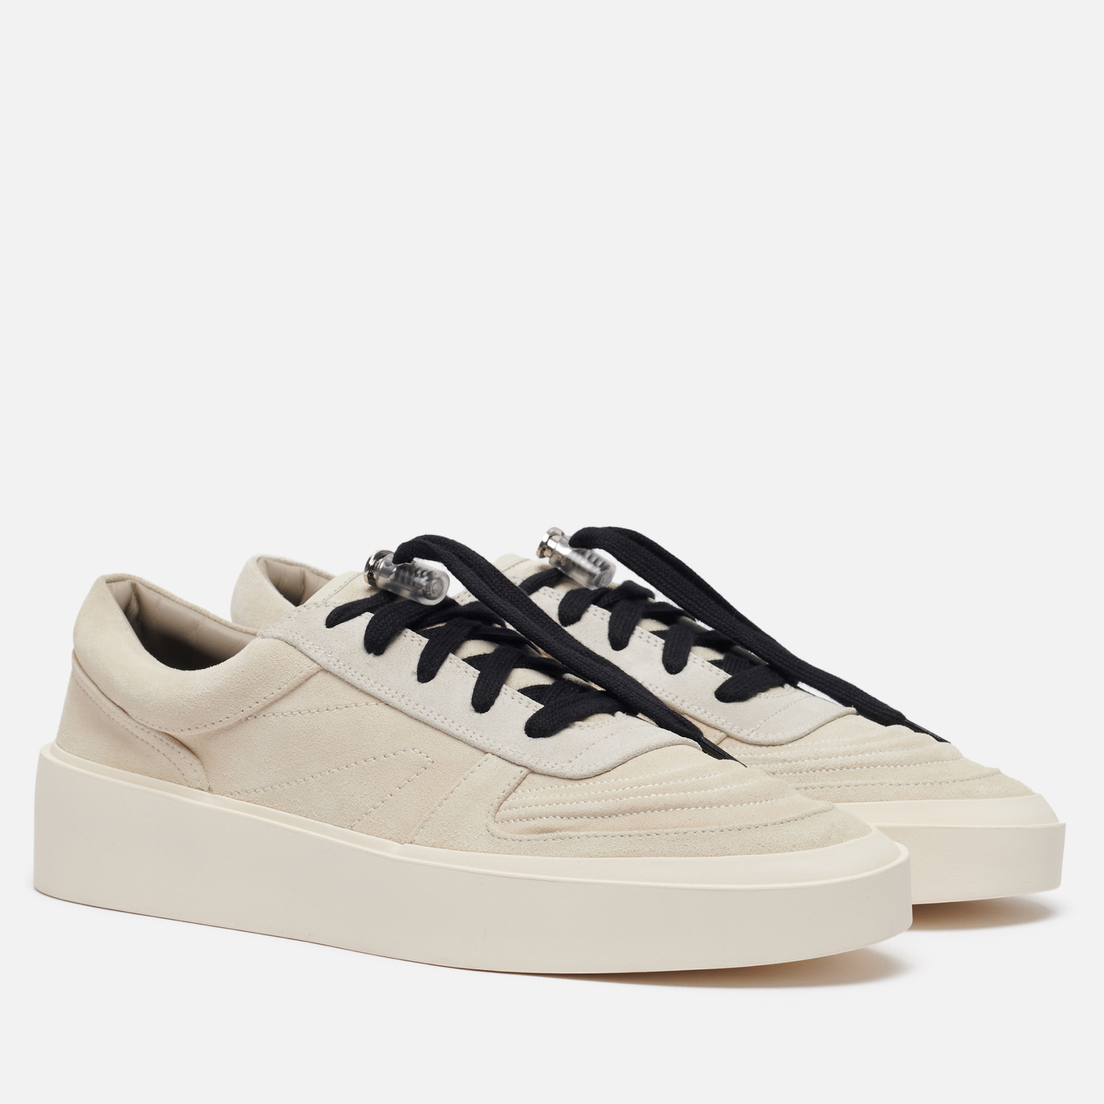 Fear of God Мужские кроссовки Skate Low Leather/Suede